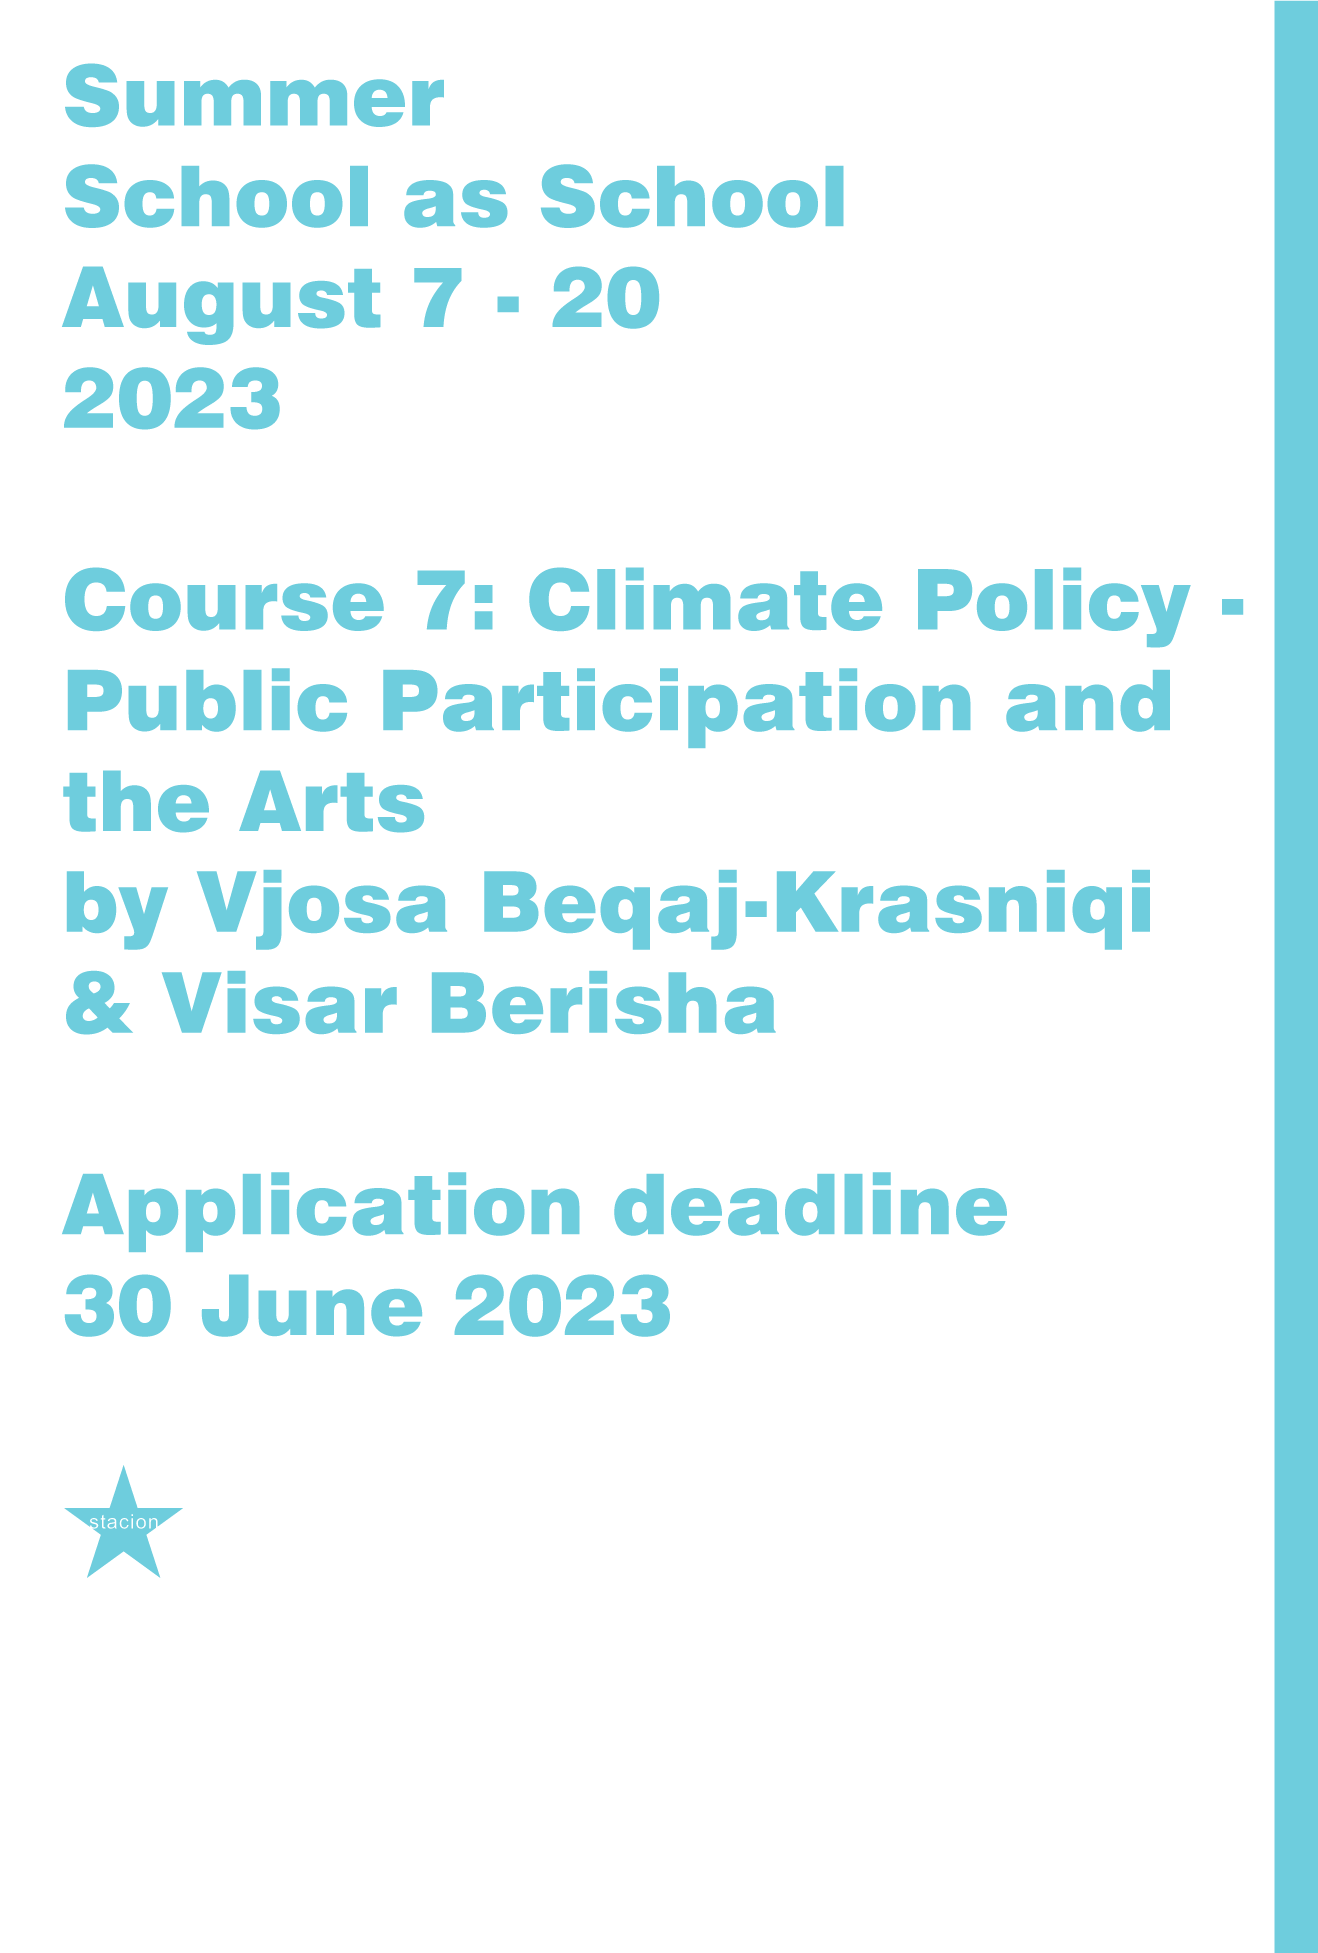 Course 7: Climate Policy - Public Participation and the Arts